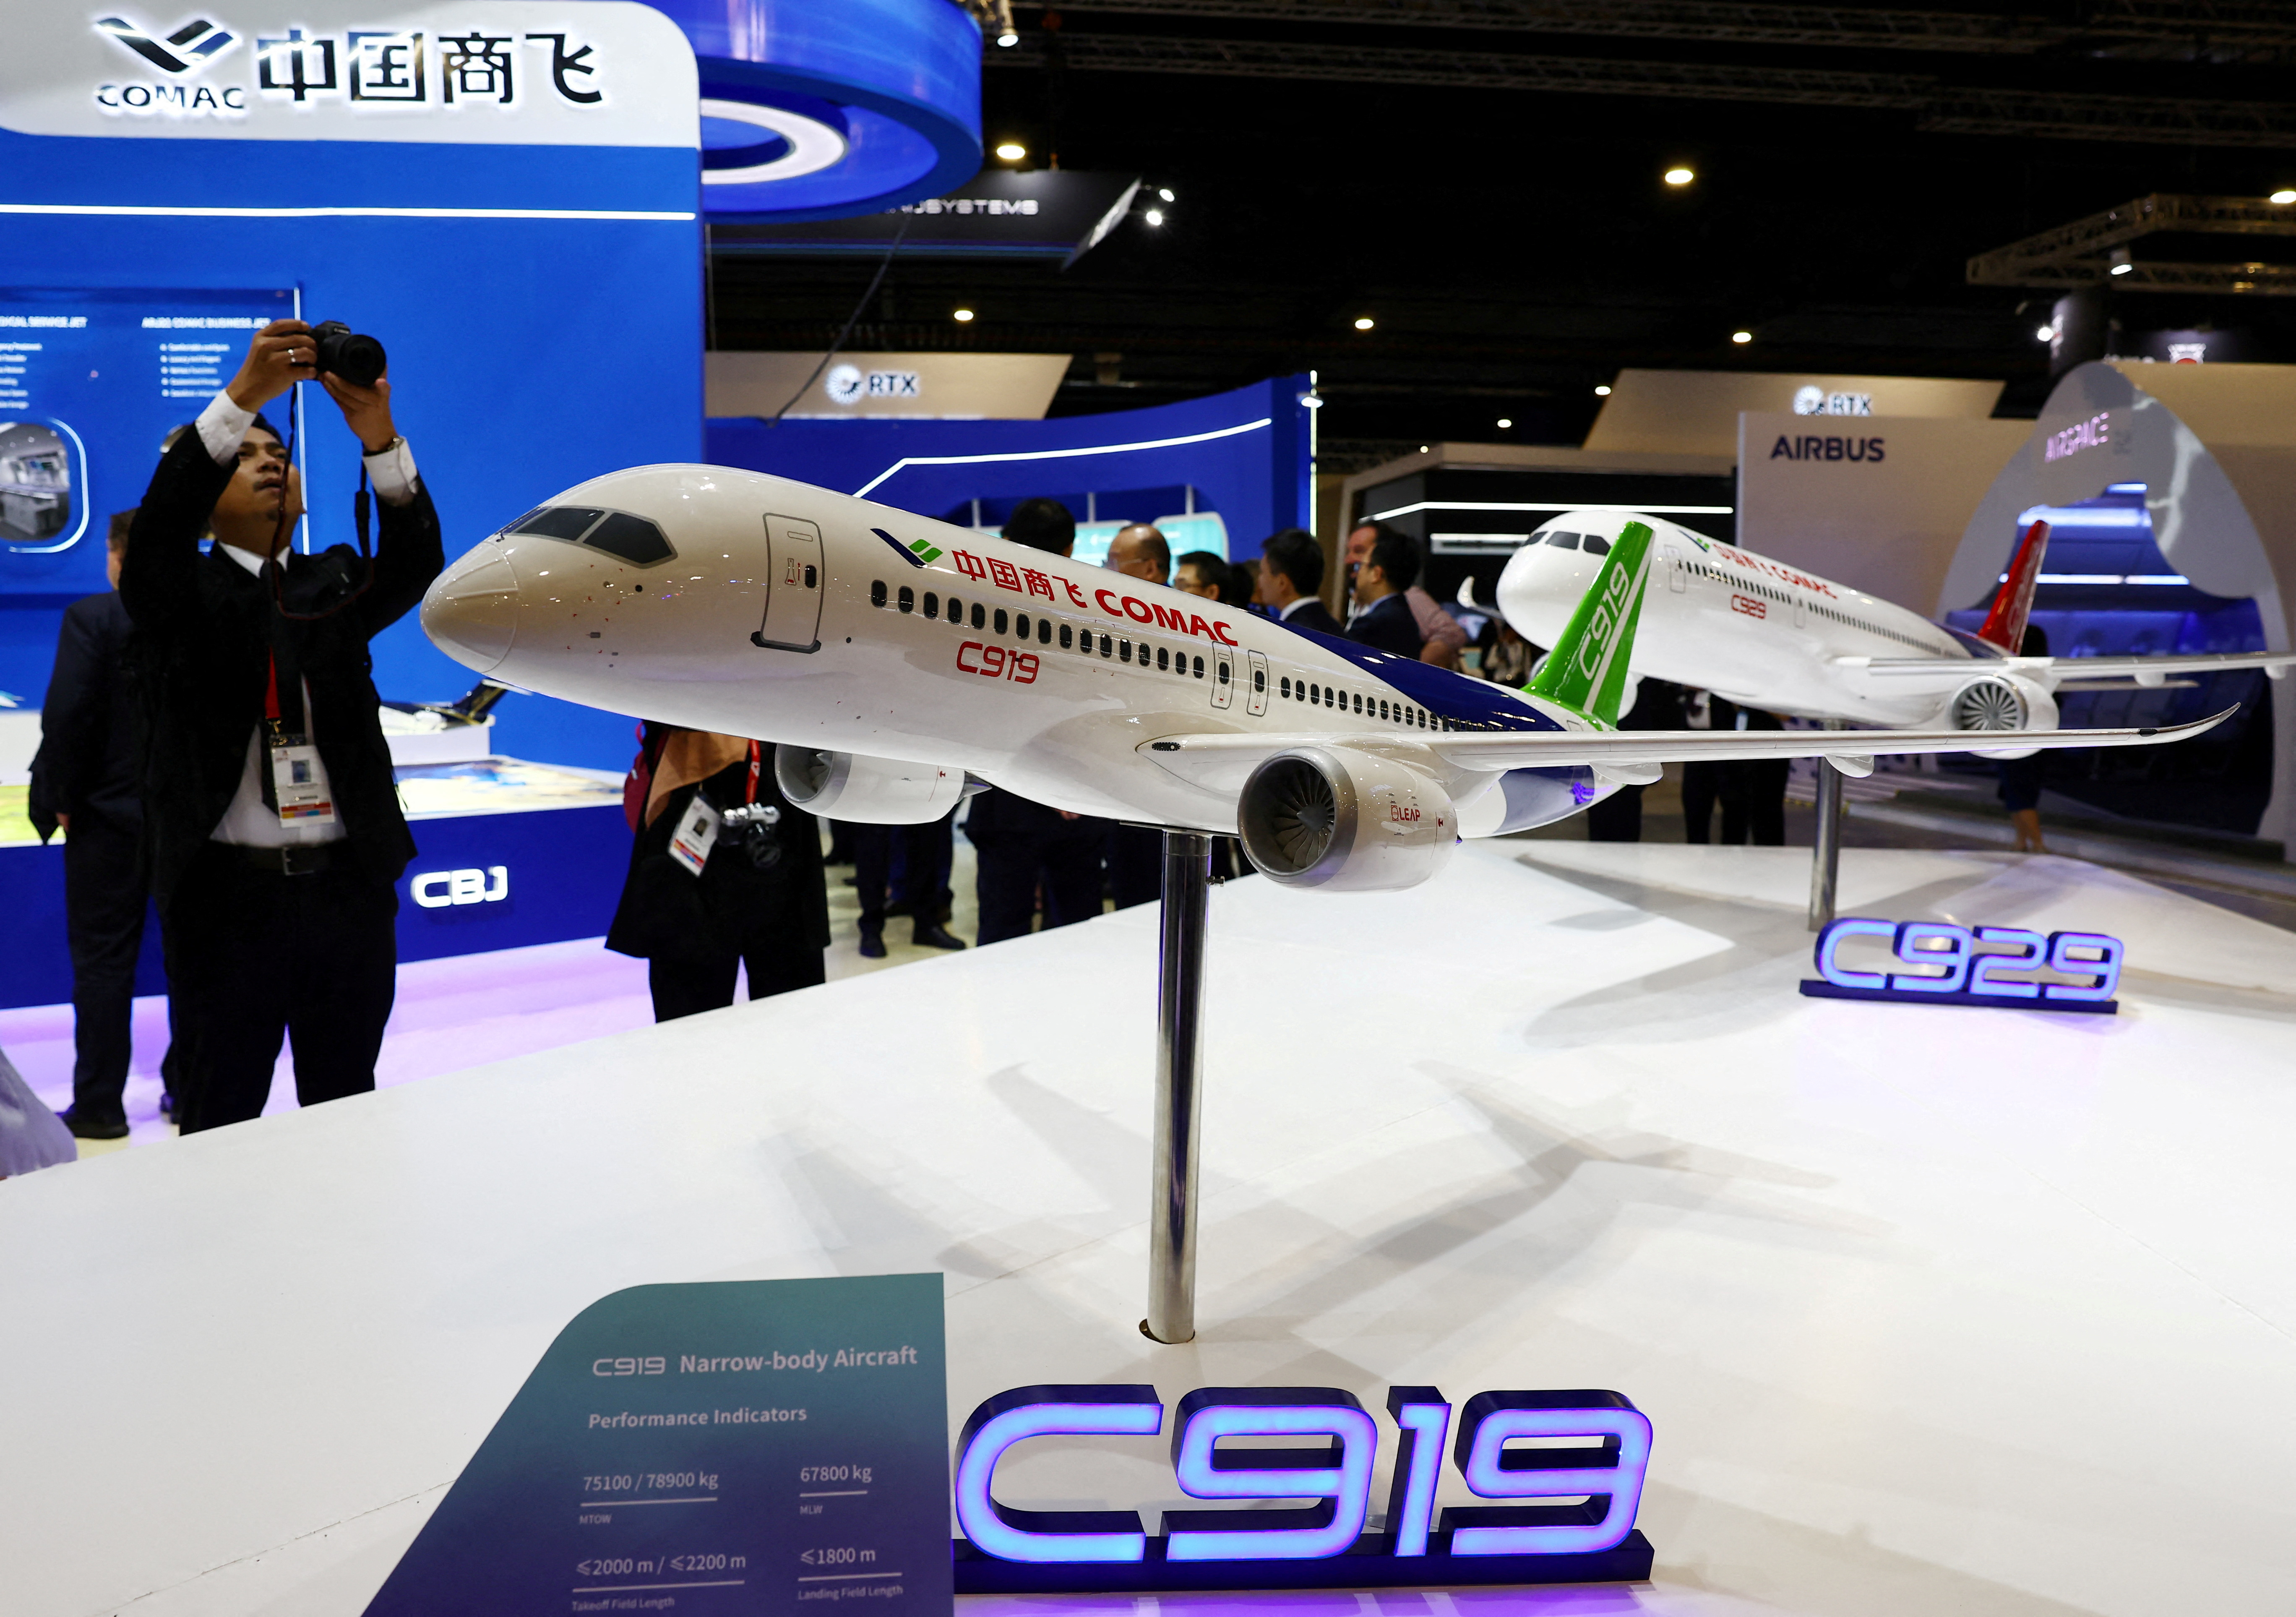 People take photos of a model of the Comac C919 plane during the Singapore Airshow at Changi Exhibition Centre in Singapore